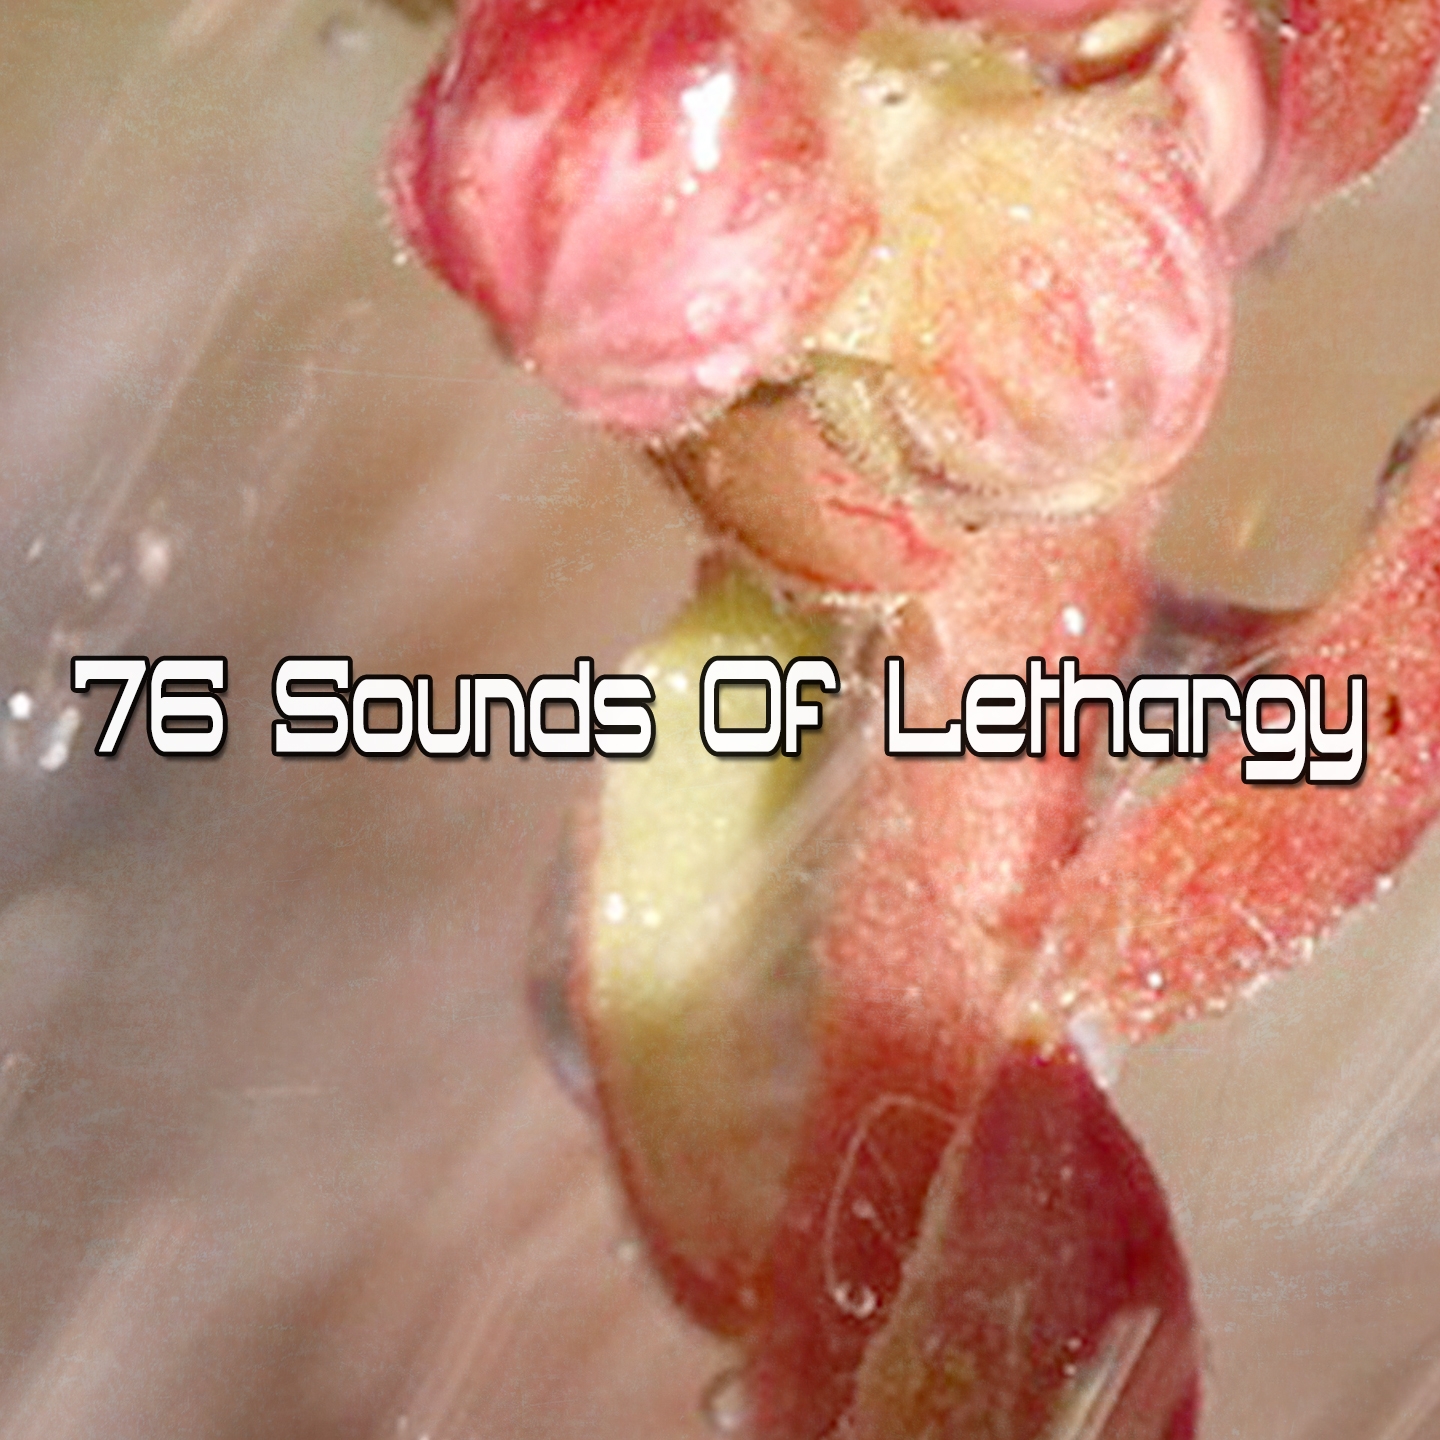 76 Sounds Of Lethargy